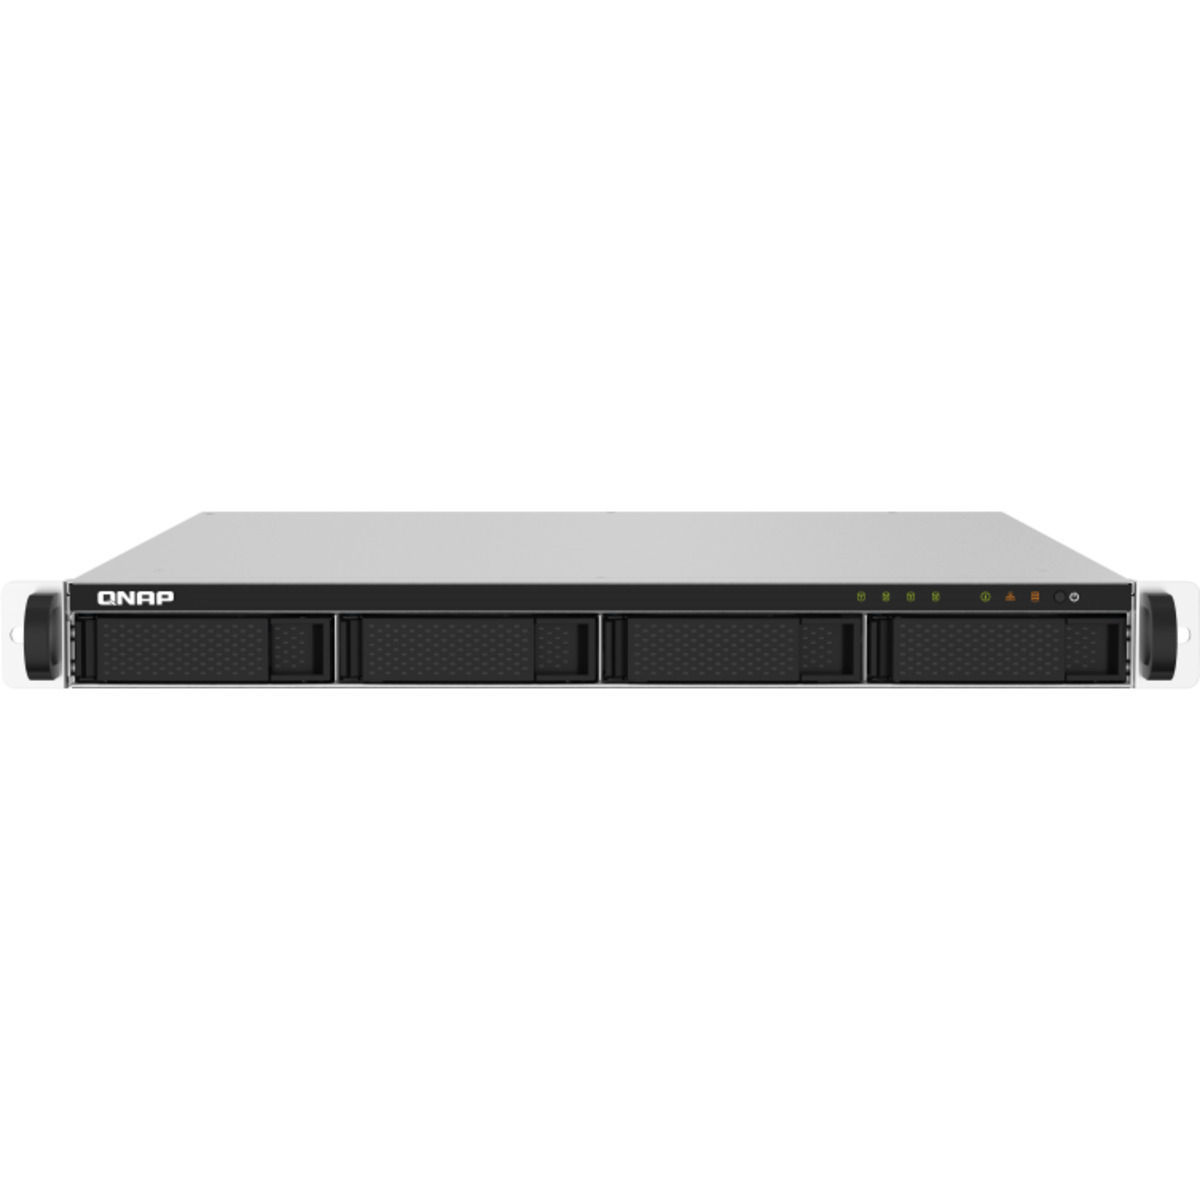 QNAP TS-432PXU-RP 12tb 4-Bay RackMount Personal / Basic Home / Small Office NAS - Network Attached Storage Device 3x4tb Seagate BarraCuda ST4000DM004 3.5 7200rpm SATA 6Gb/s HDD CONSUMER Class Drives Installed - Burn-In Tested - FREE RAM UPGRADE TS-432PXU-RP